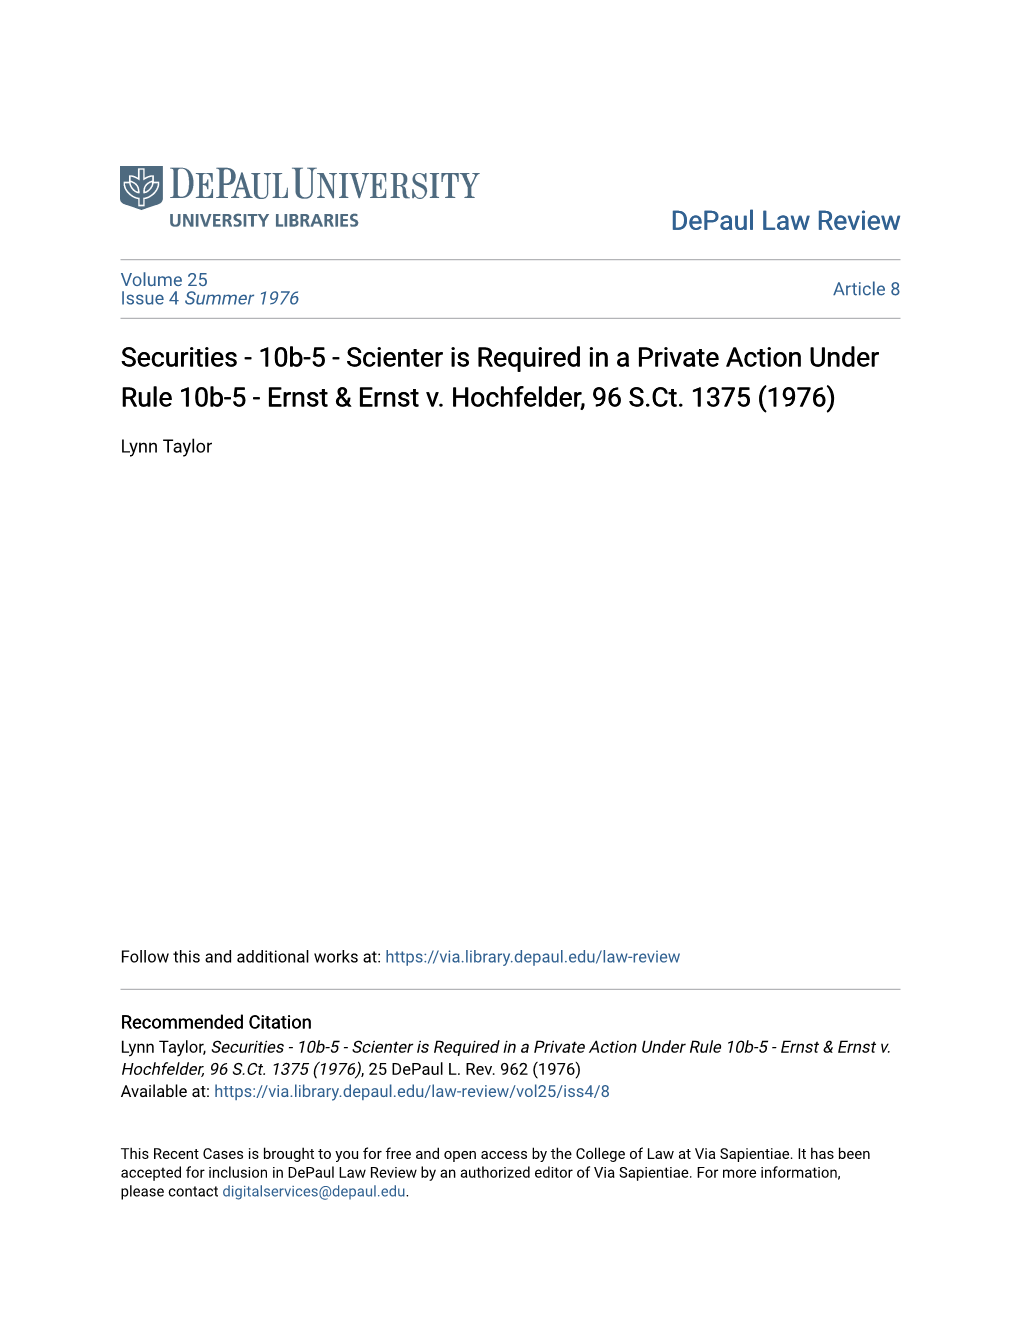 Scienter Is Required in a Private Action Under Rule 10B-5 - Ernst & Ernst V